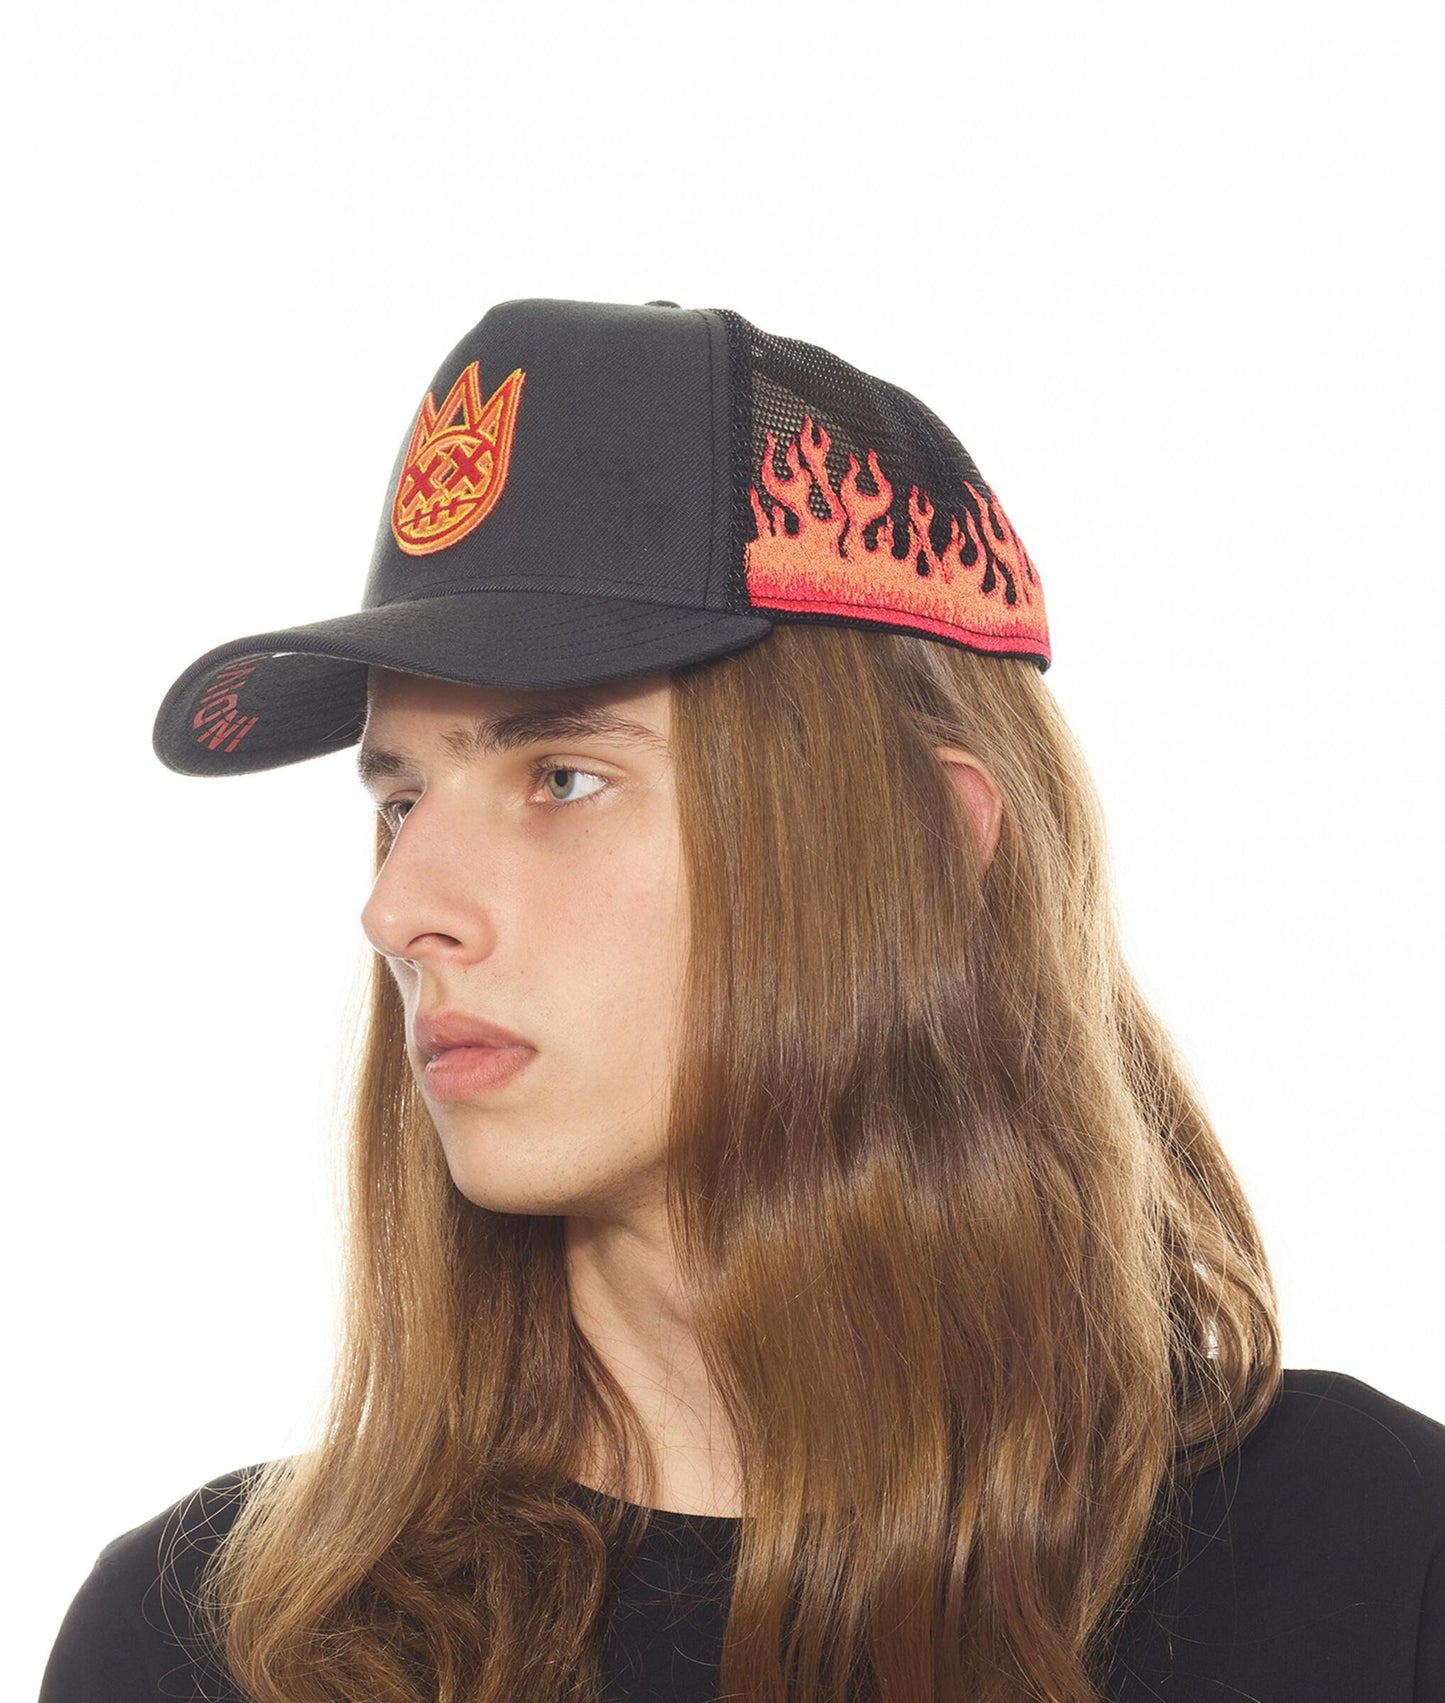 Hats, Fitted Hats, Trucker, Style, Snapback, Men, Boys, Teens, Gifts, Hat, Cult Of Individuality, Black, Hat, Wmns, Girls, Urban, Style, Fashion, Flames, Mesh Hat